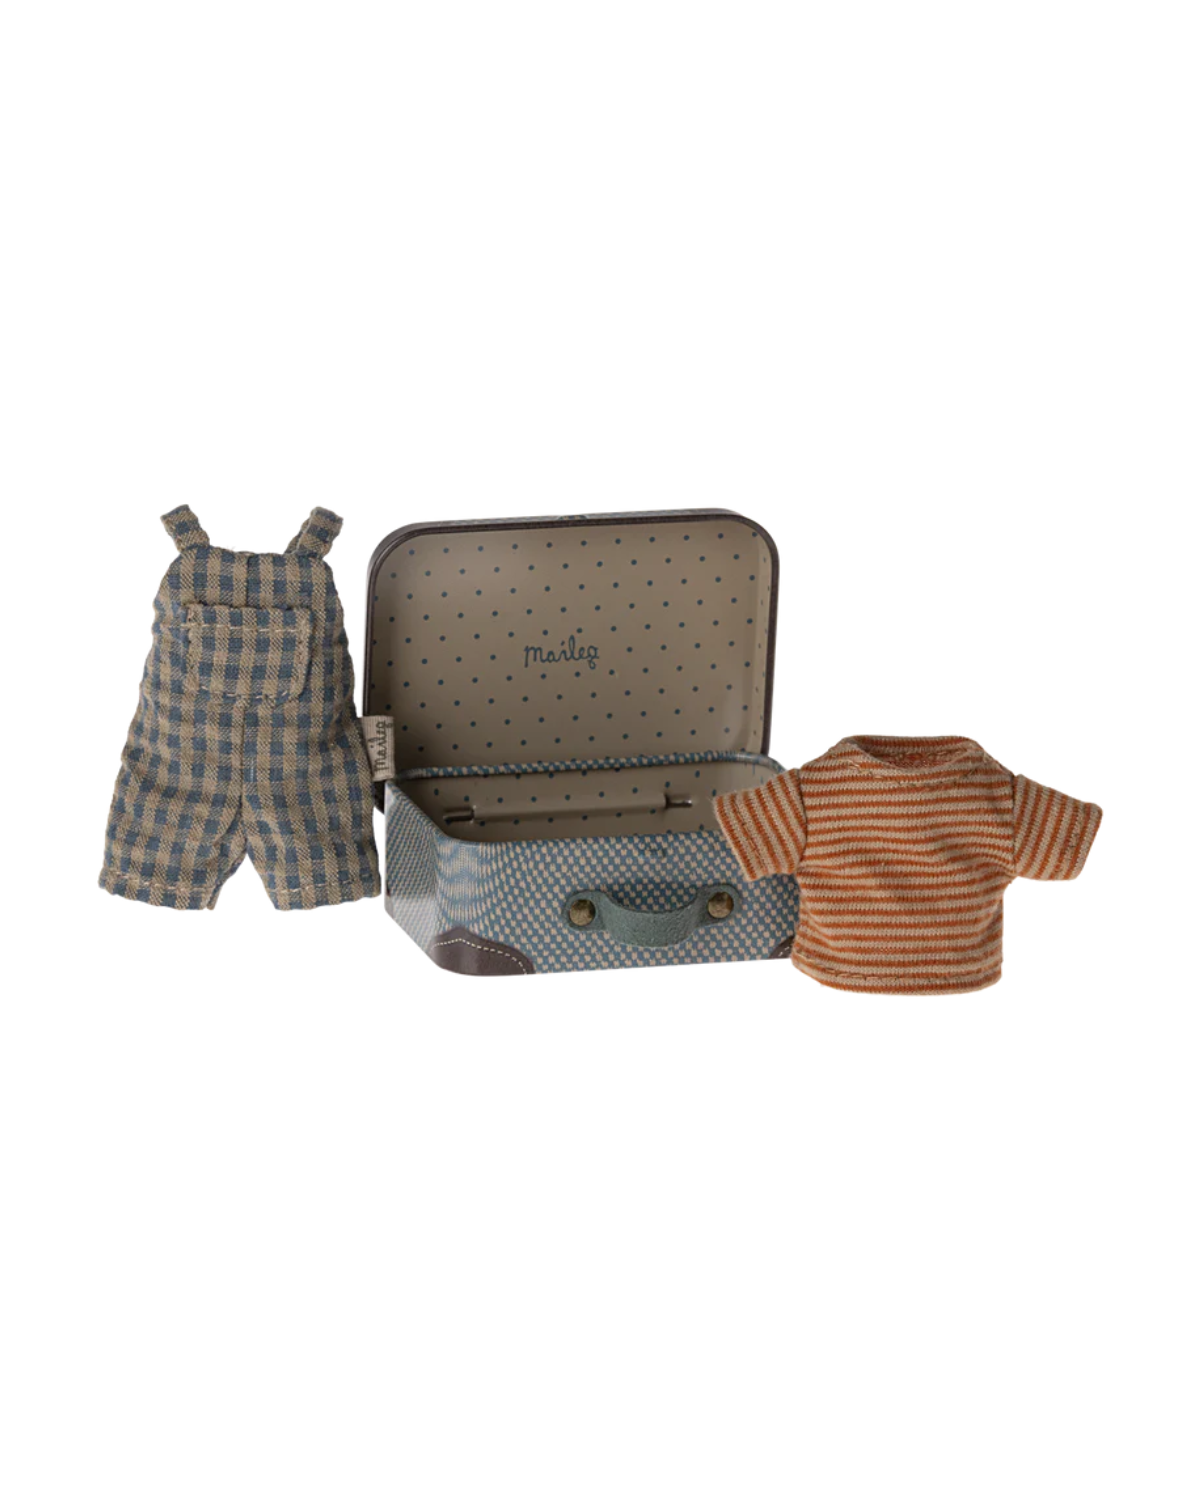 Maileg Big Brother Mouse Overalls & Shirt in Suitcase: Dollhouse Wardrobe